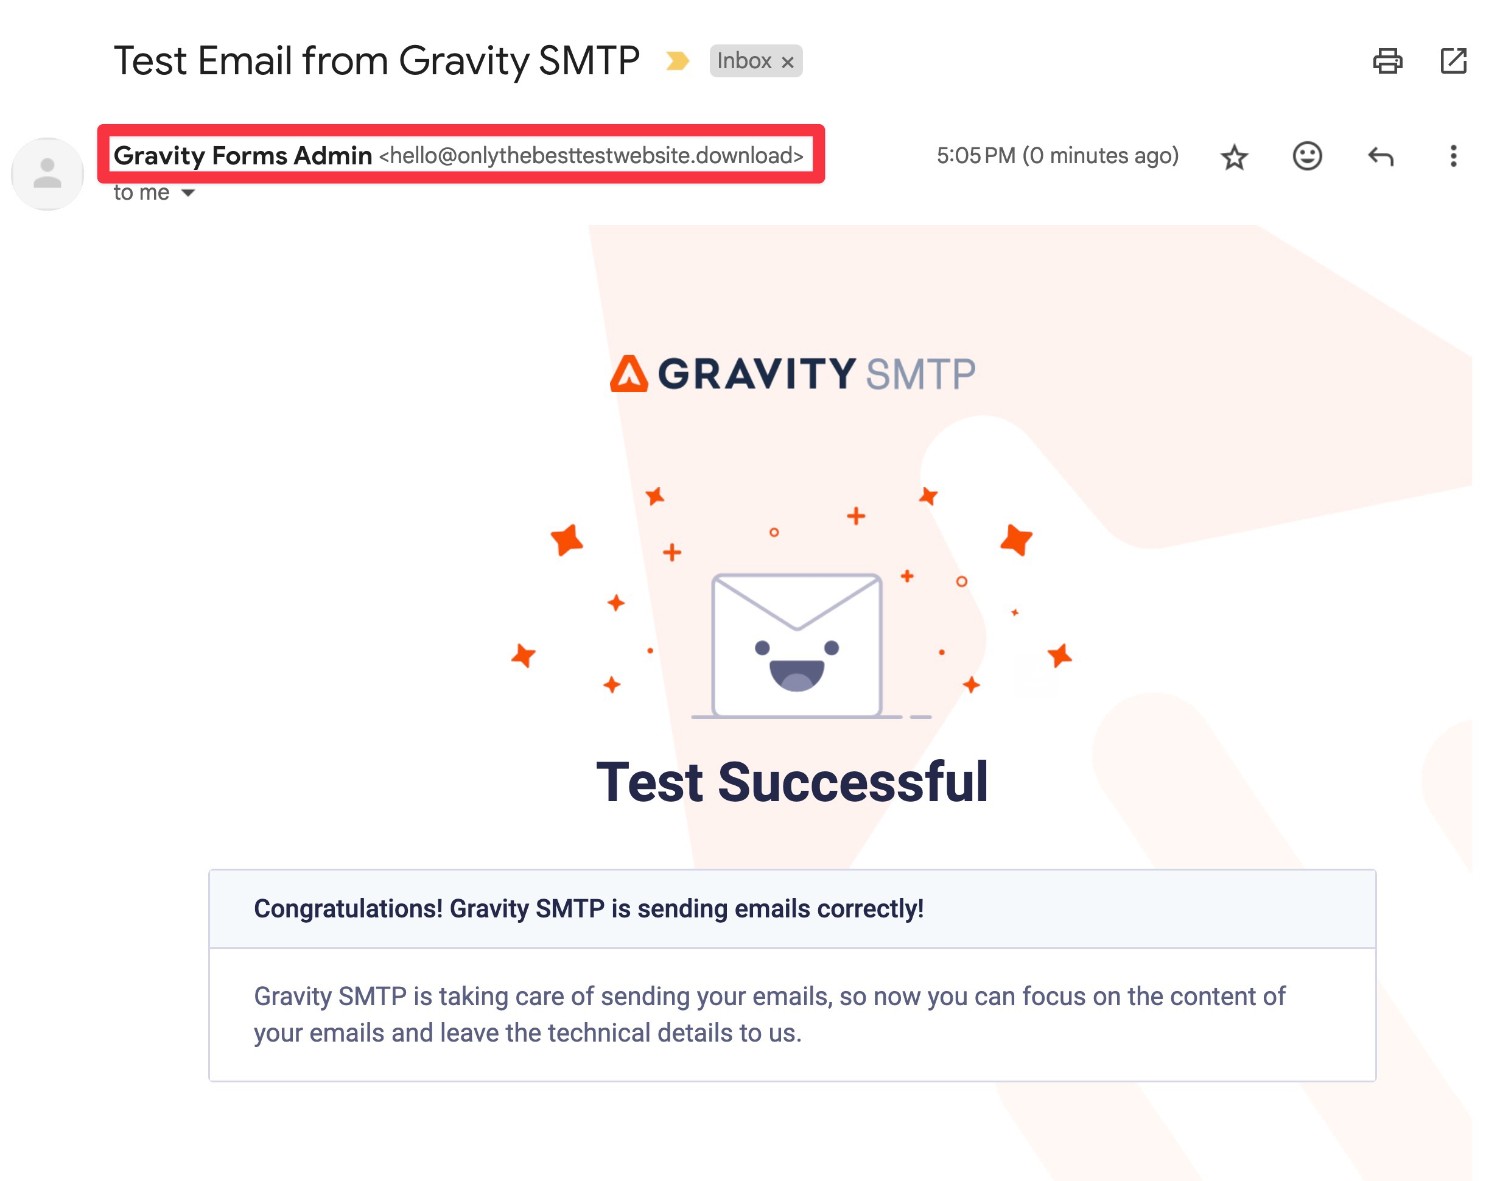 Gravity SMTP test email